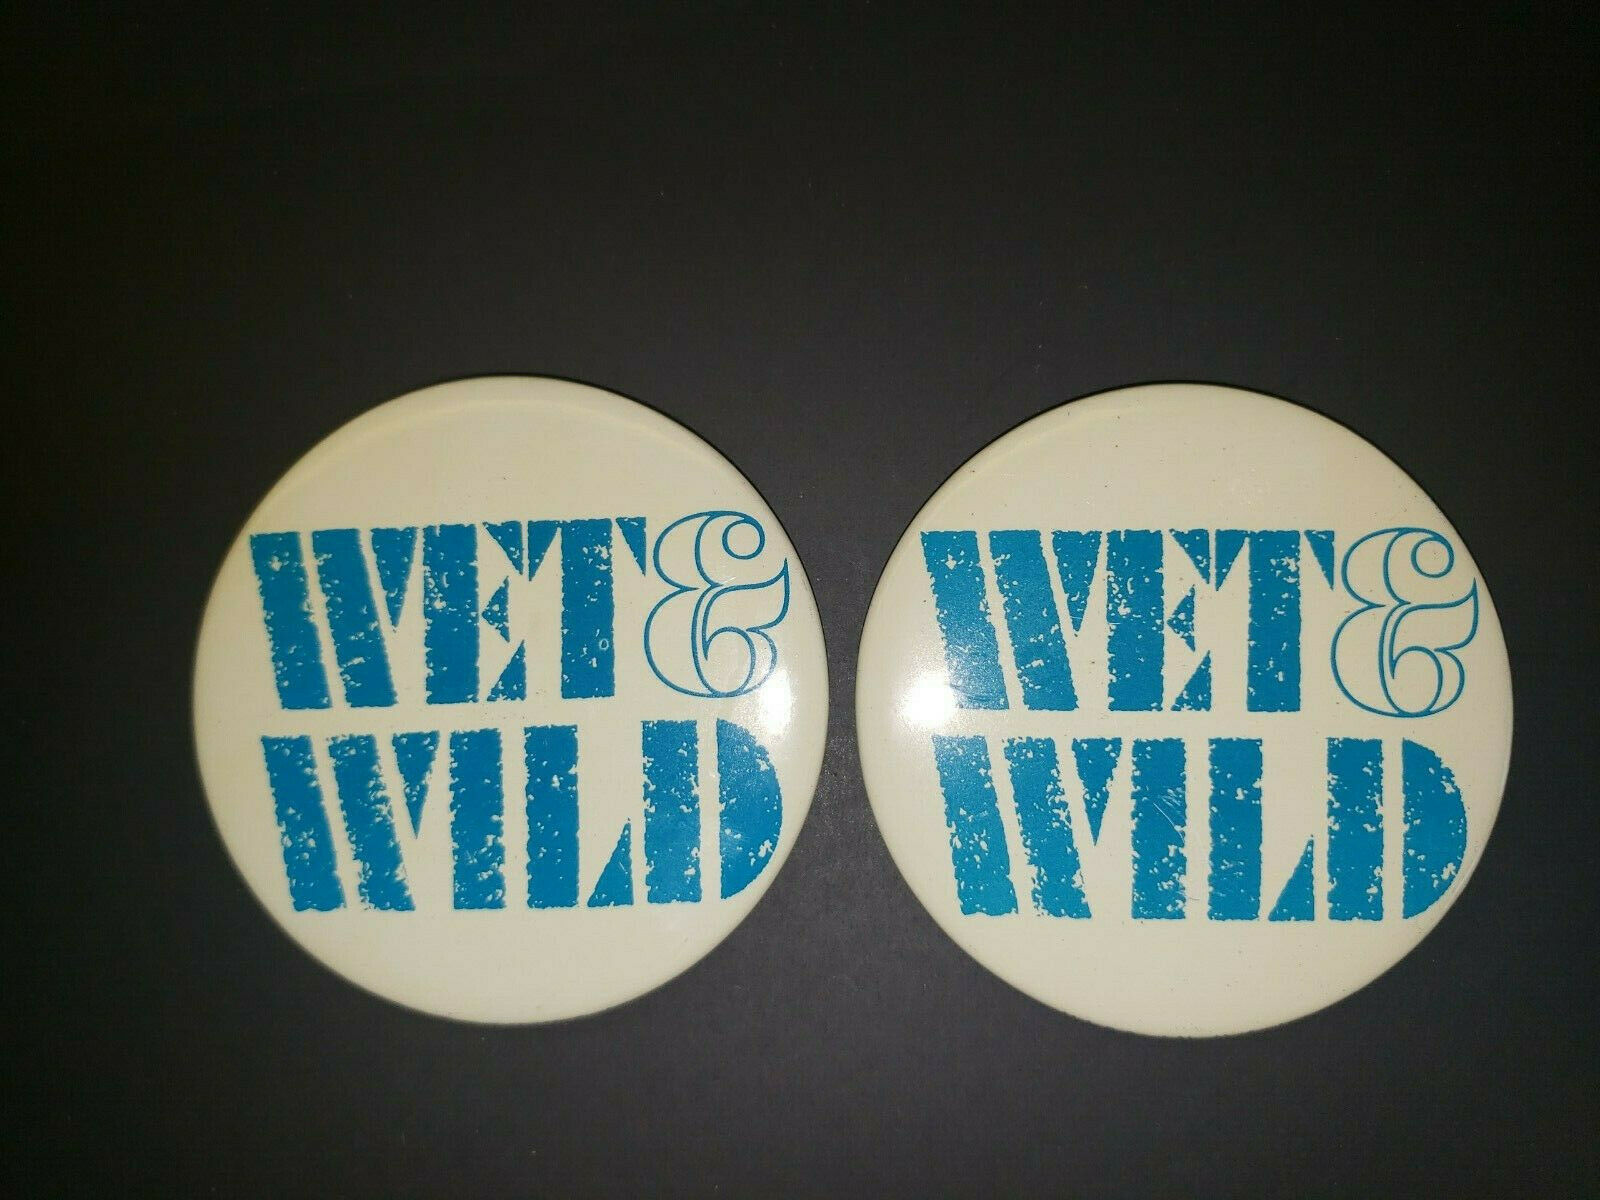 Vintage Wet & Wild 7up Soda Pinback Button Lot of 2 New Old Stock L1 - $10.99